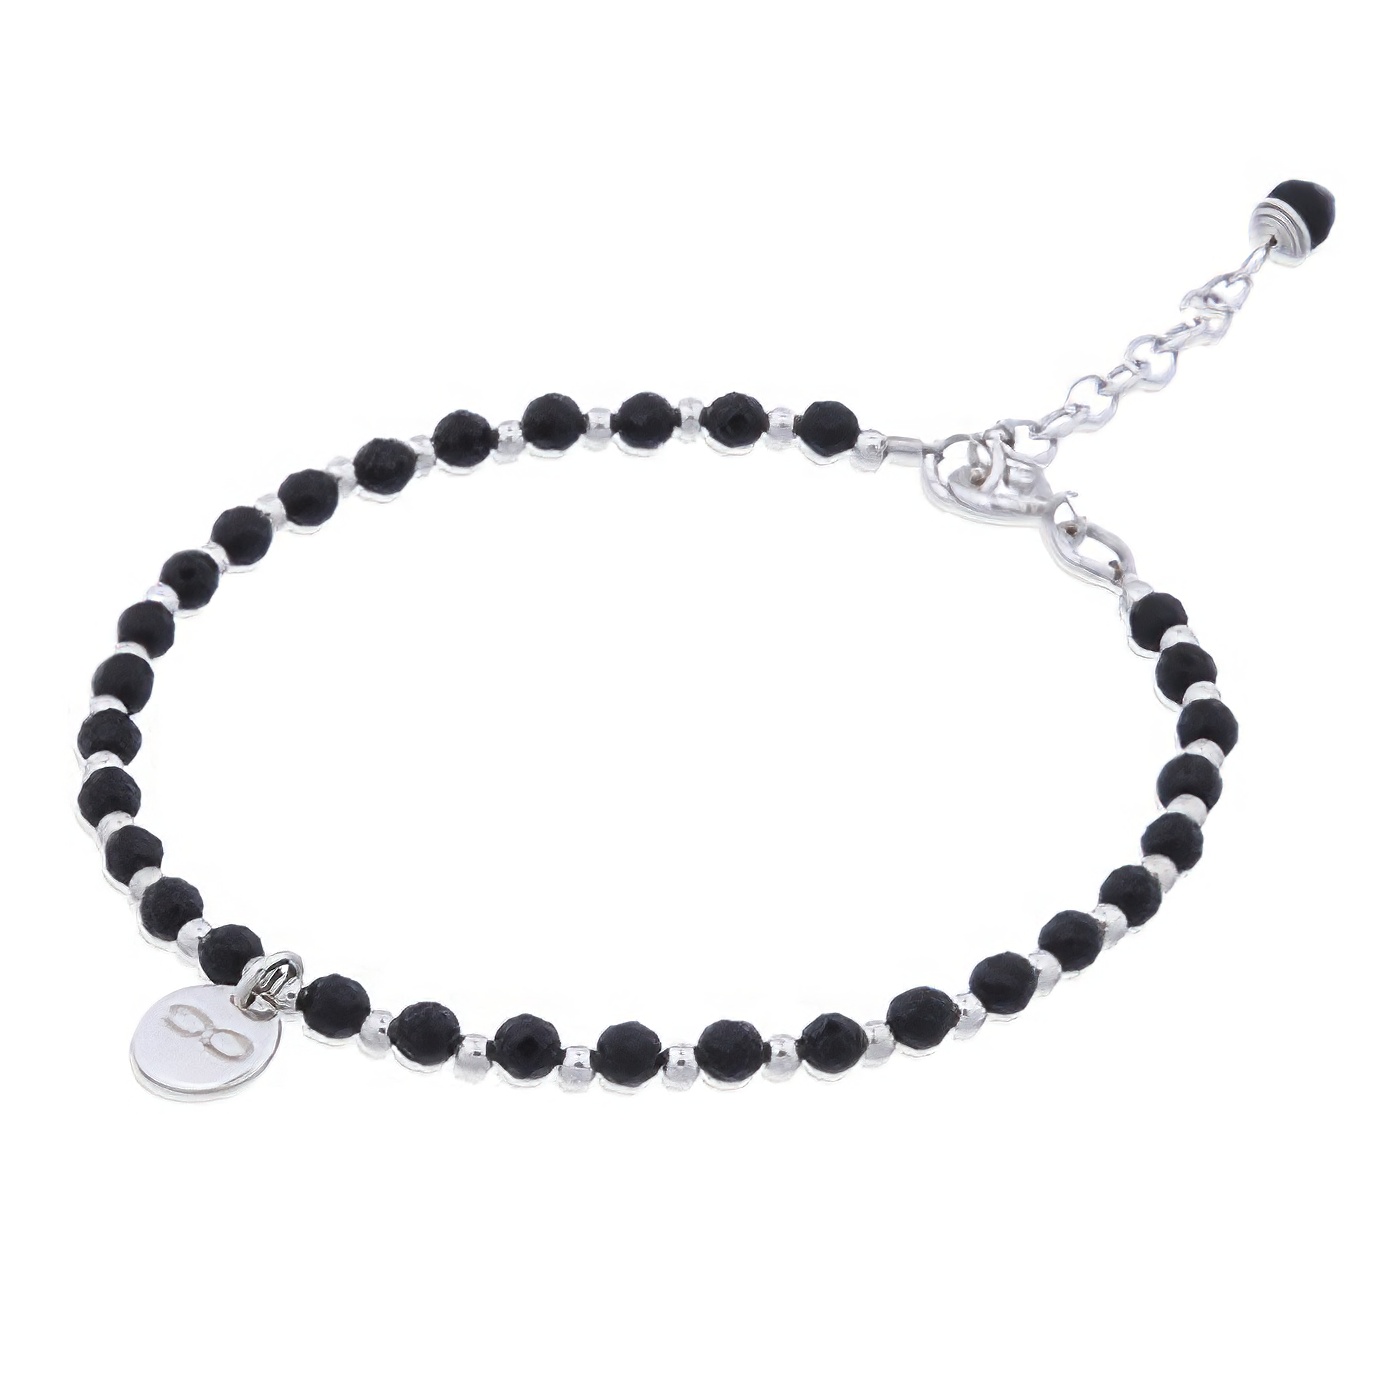 Agate & Silver Beads Bracelet with Infinity Charm 